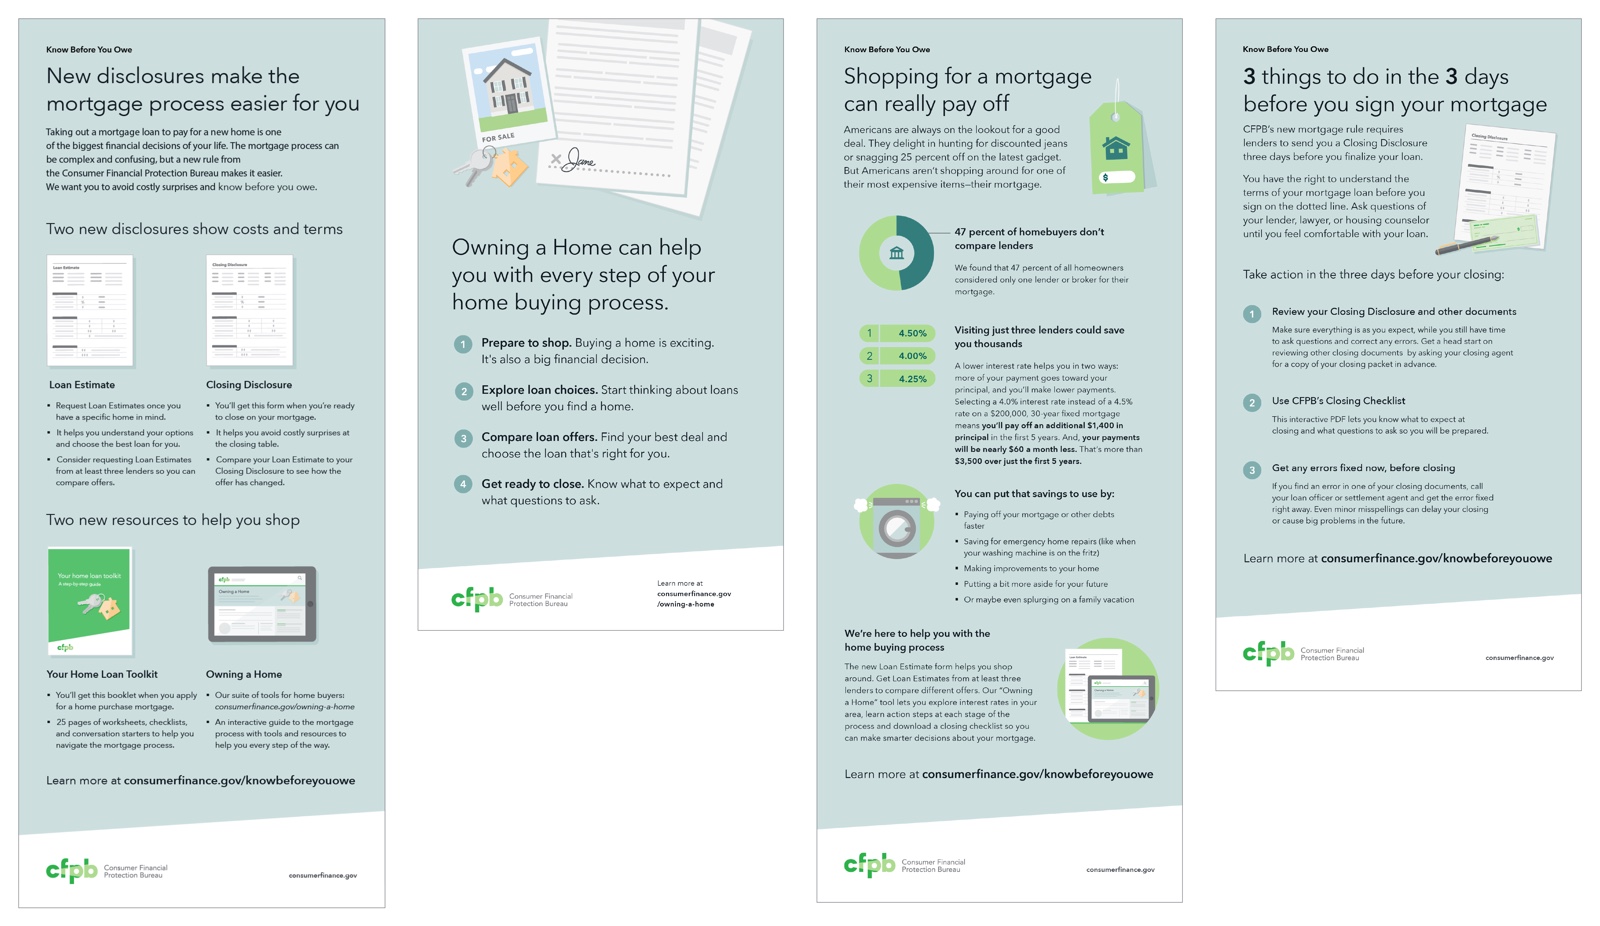 Know Before You Owe Launch Campaign explainer infographics